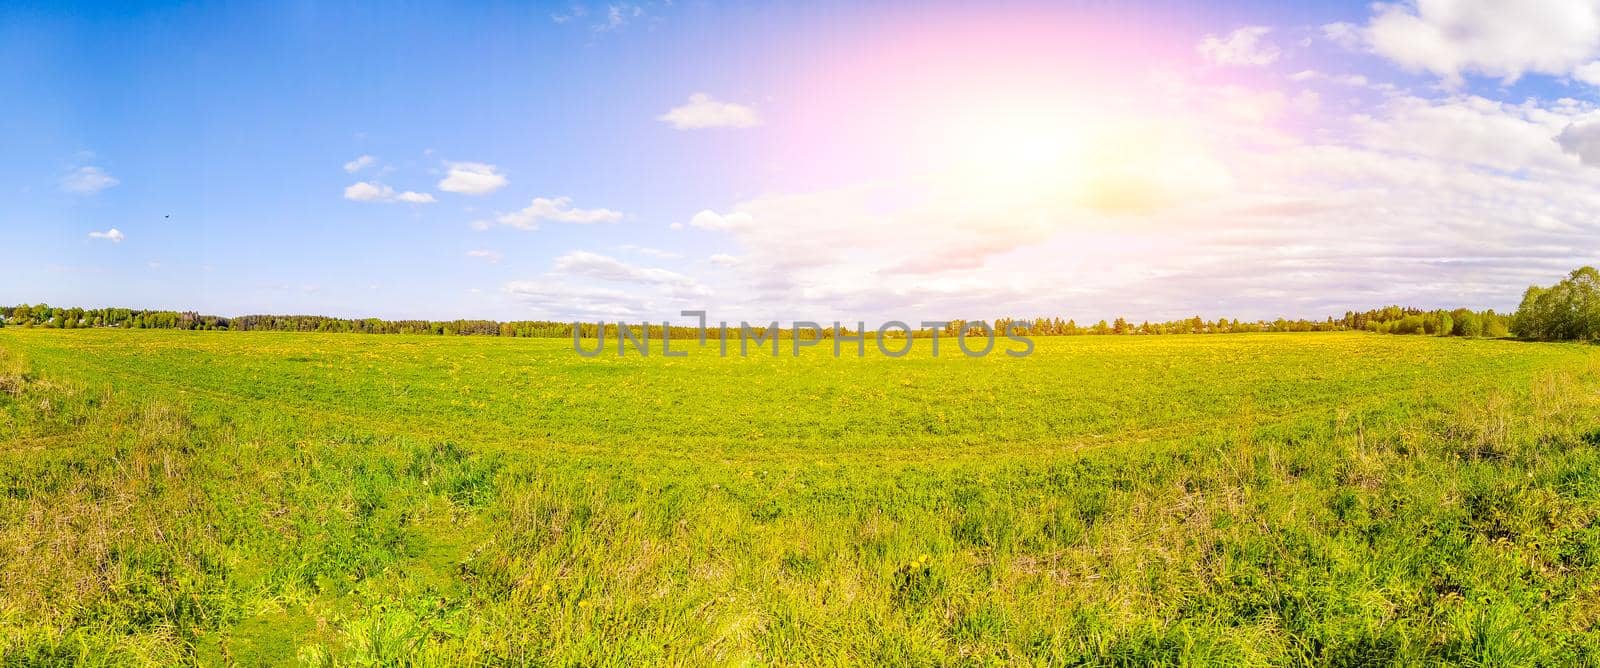 Panorama summer landscape in the field. Russian open spaces. Summer landscape. Flowers in the field. Blue sky. Copy spase.